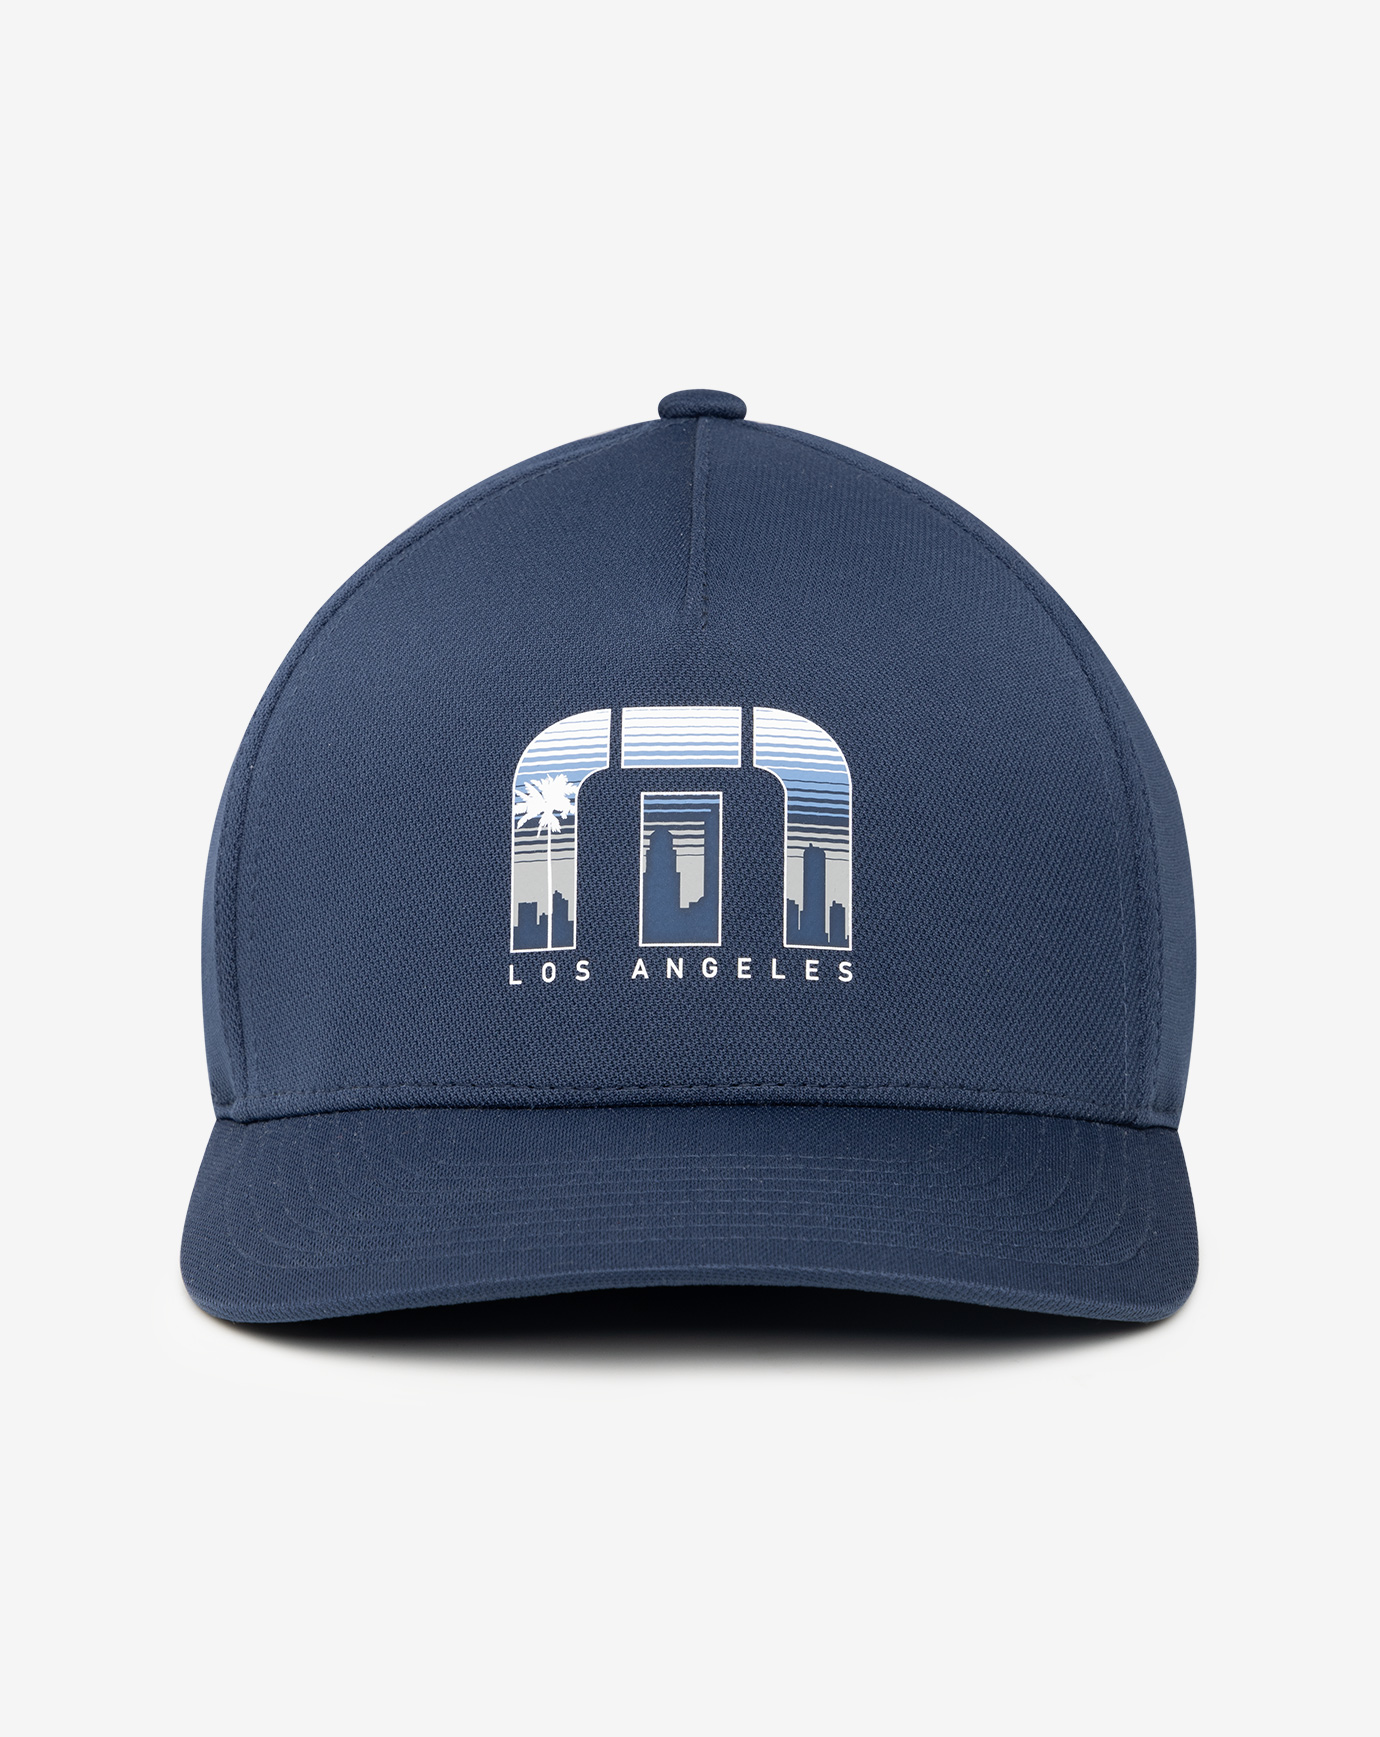 ECHO PARK FITTED HAT 1